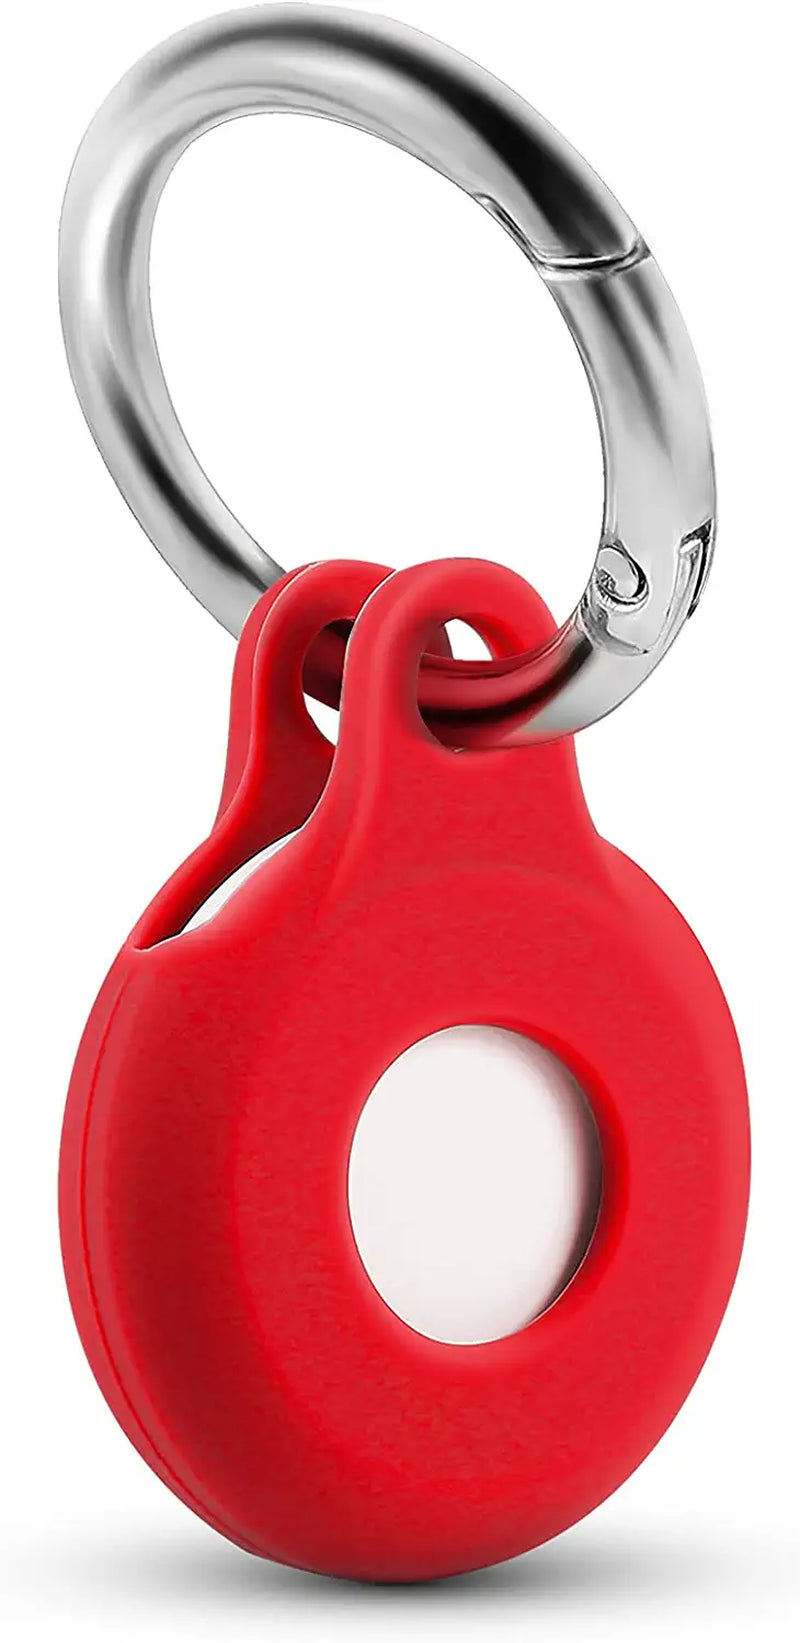 Airtag Case Compatible with Apple Airtag Case for Airtag Keychain,Pet Airtag Collar -Red